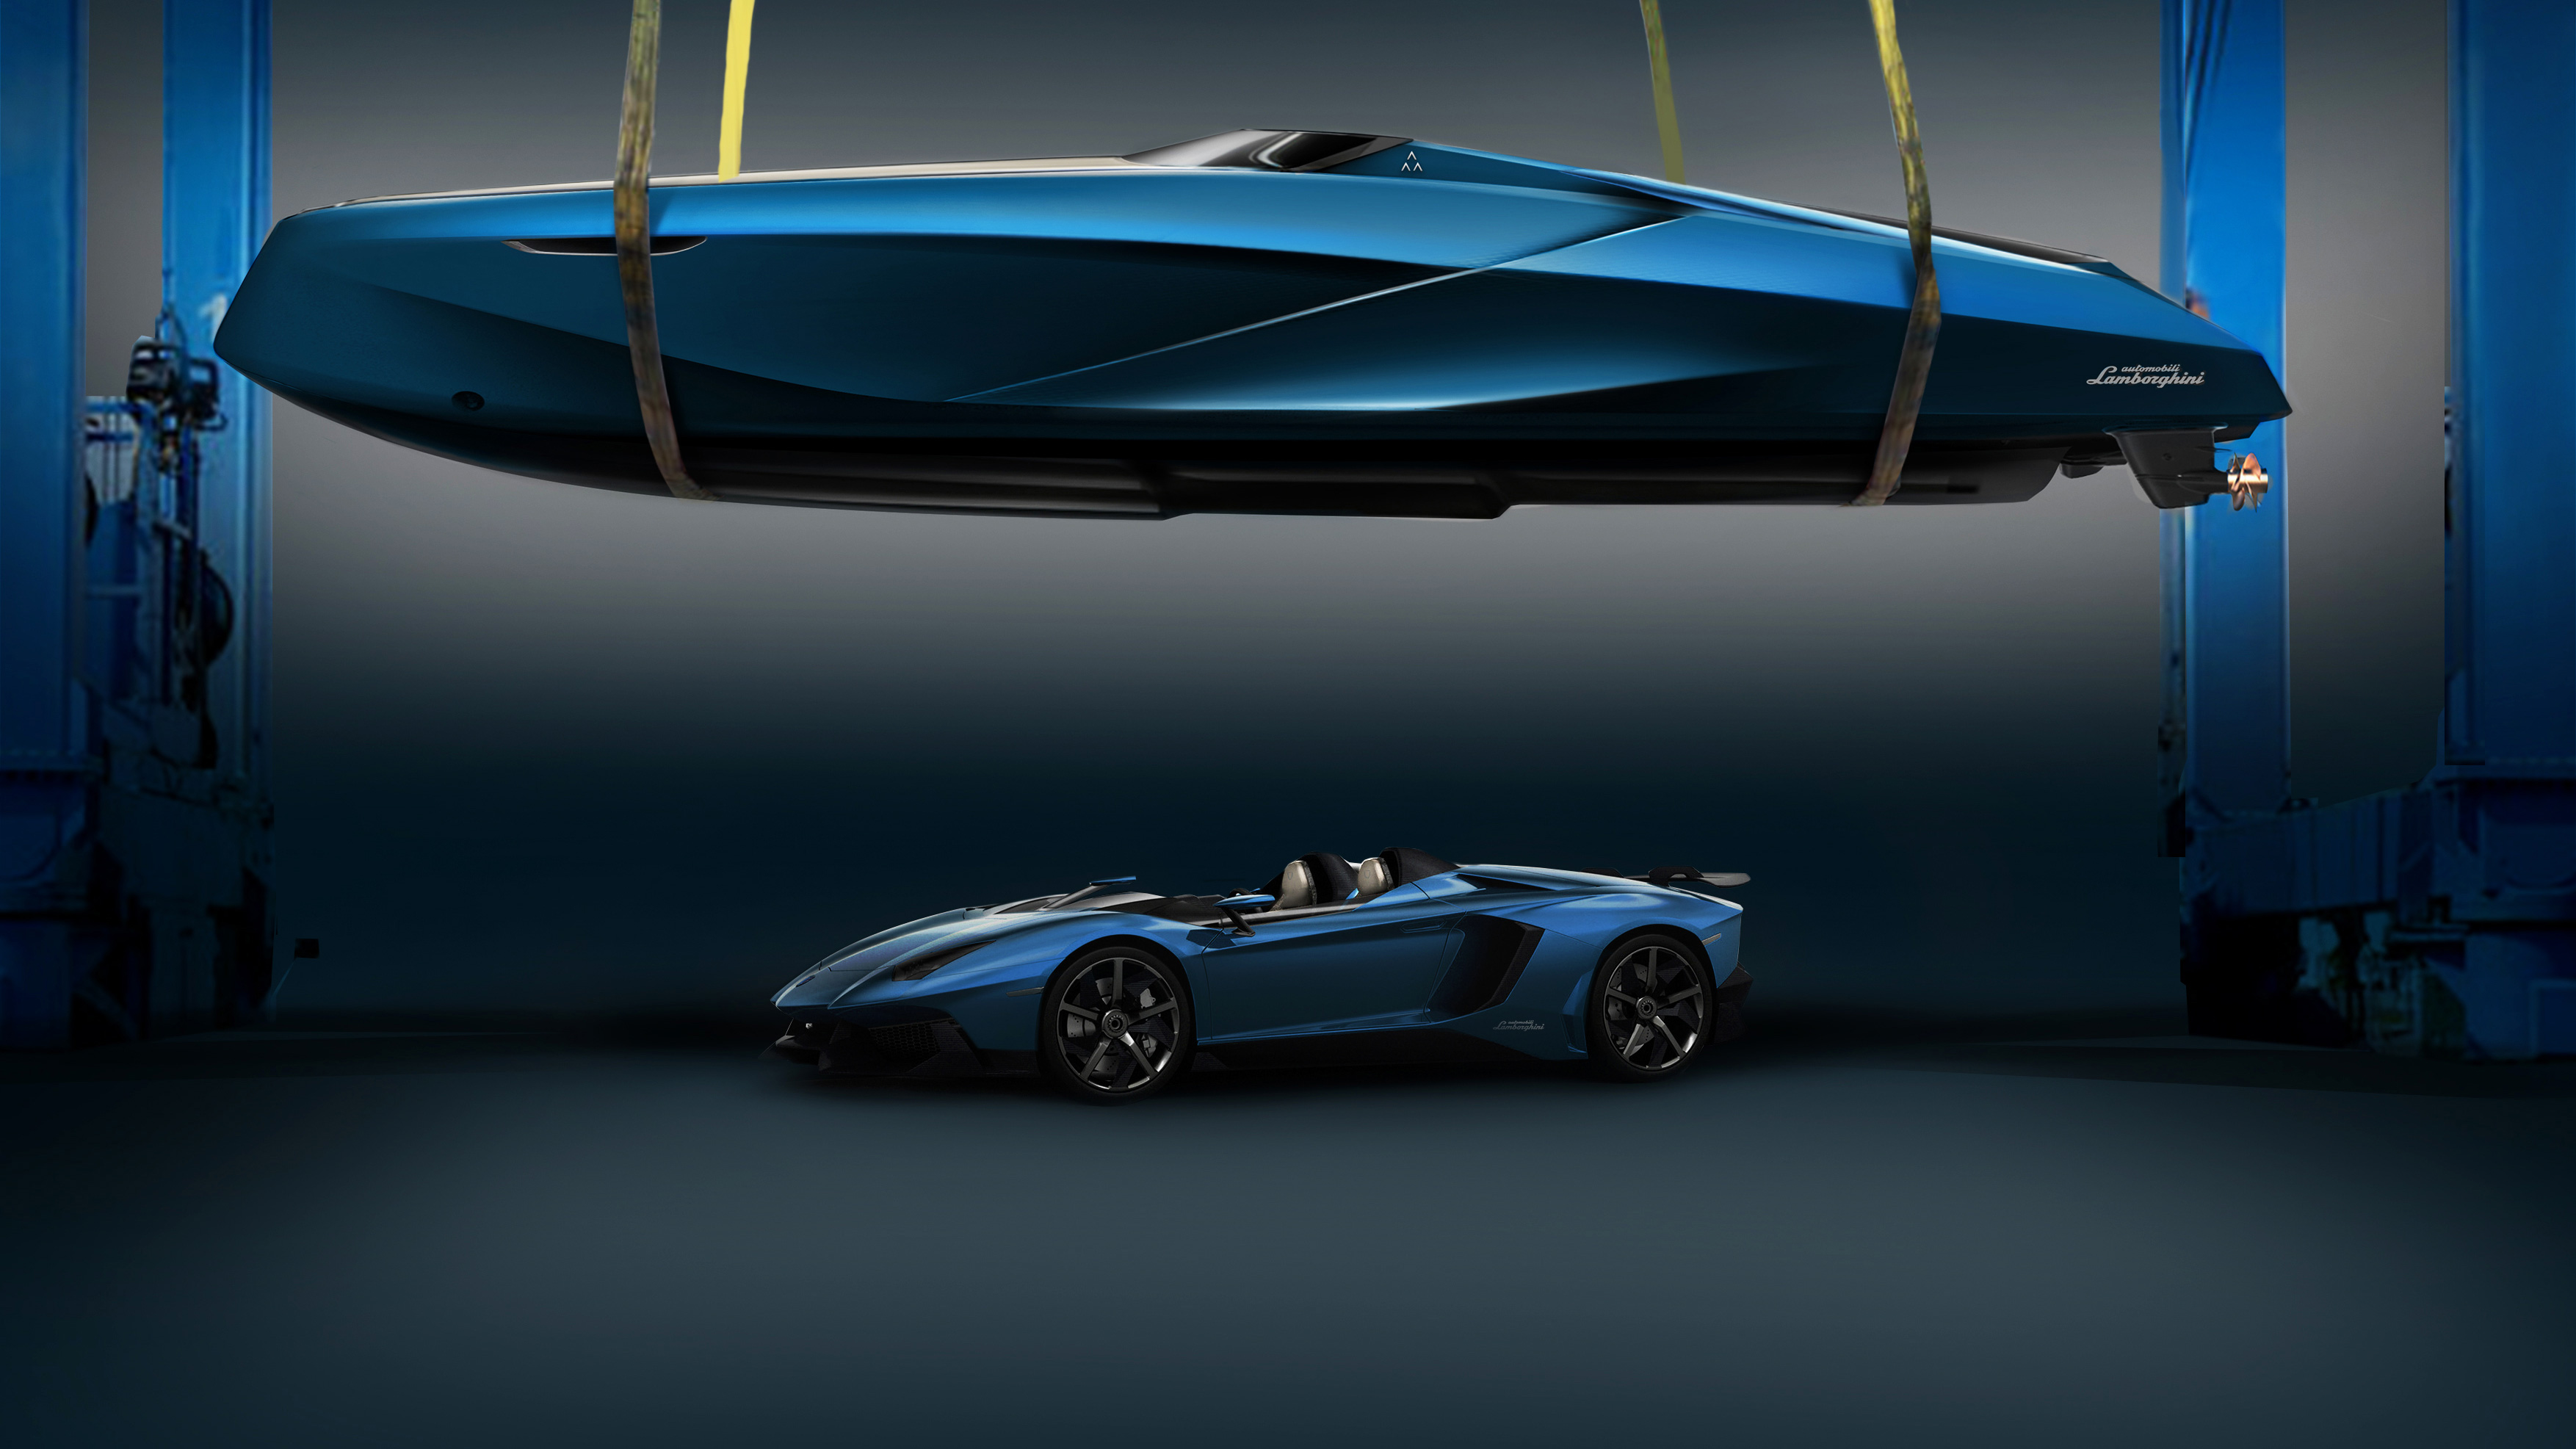 Lamborghini Armare Yacht Concept, HD Cars, 4k Wallpapers, Images